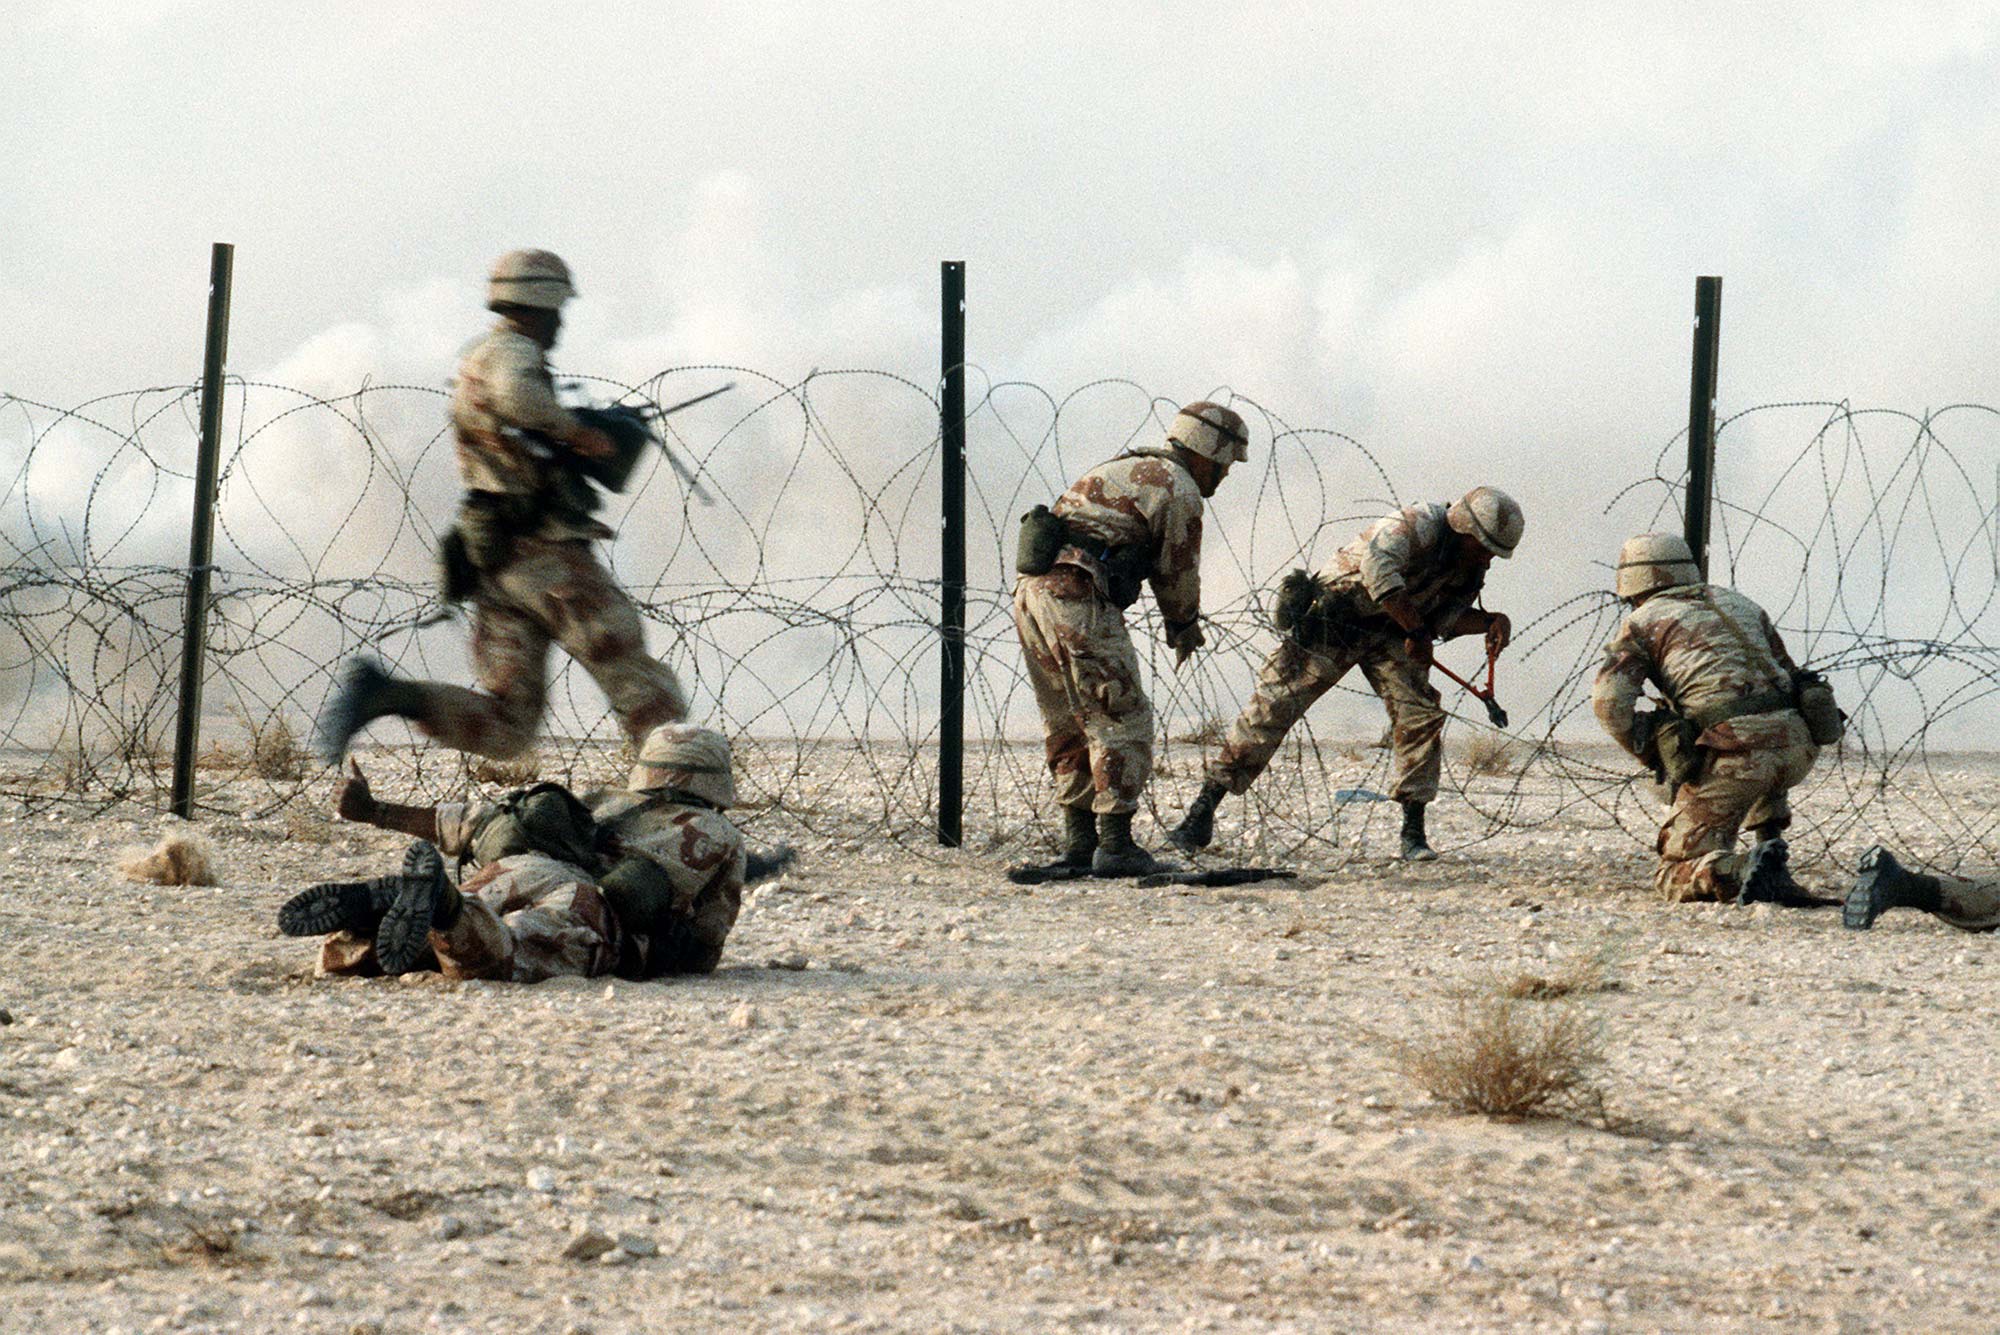 Members of the 1st Battalion, 325th Airborne Infantry Regiment, make their way through concertina wire during a live fire demonstration during Operation Desert Shield.